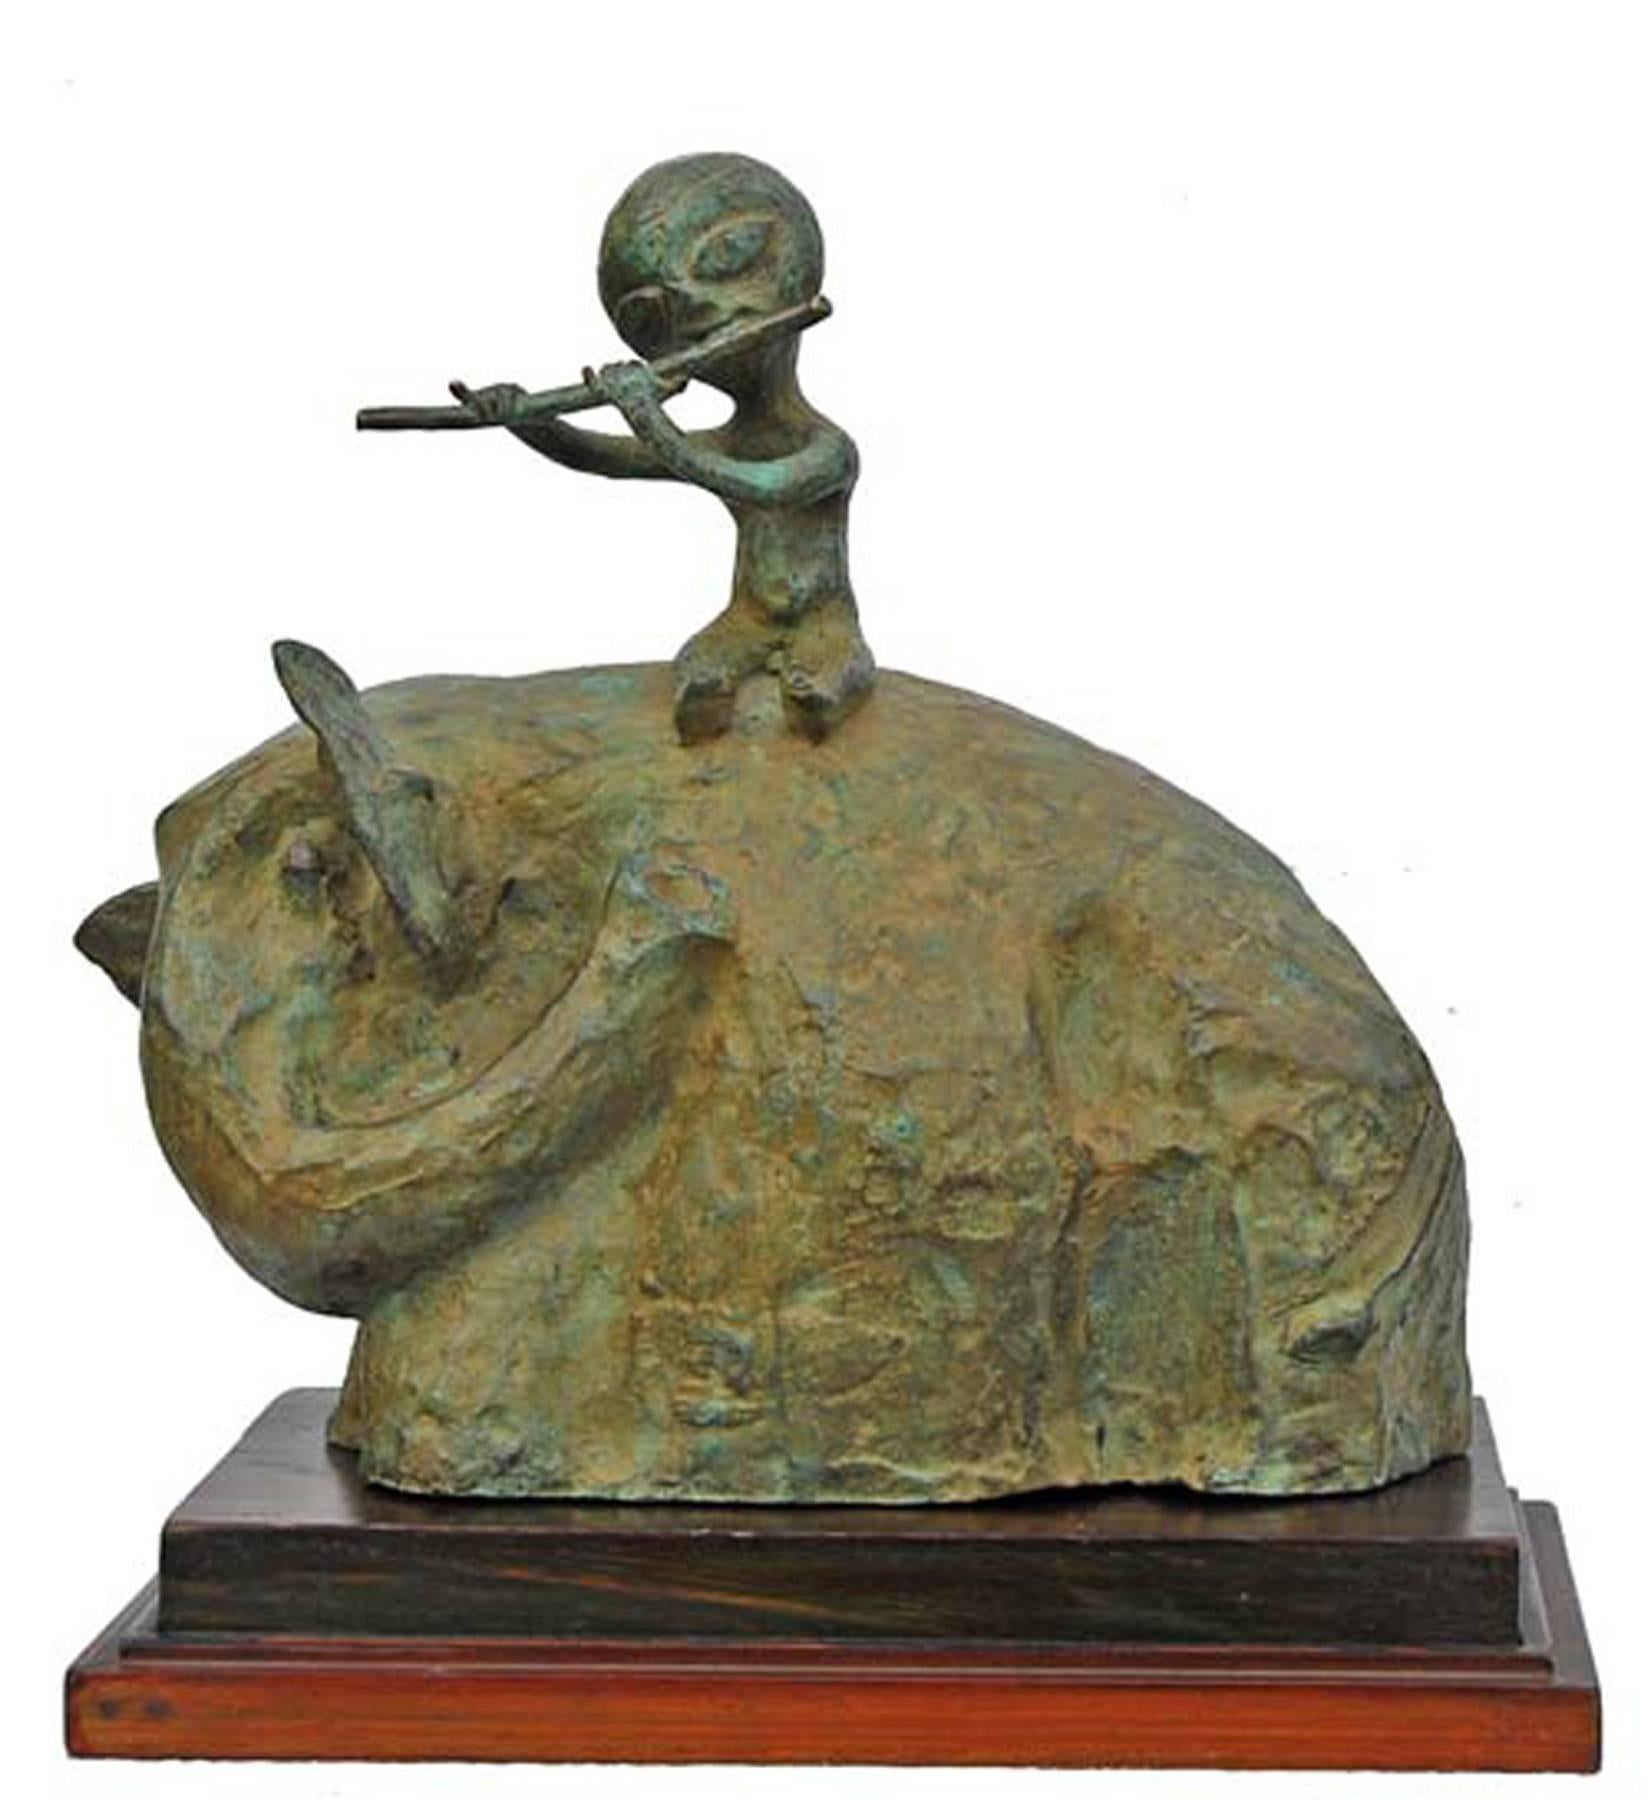 Subrata Biswas Figurative Sculpture - Krishna seated on Elephant, Playing Flute, Bronze Sculpture, Patina "In Stock"